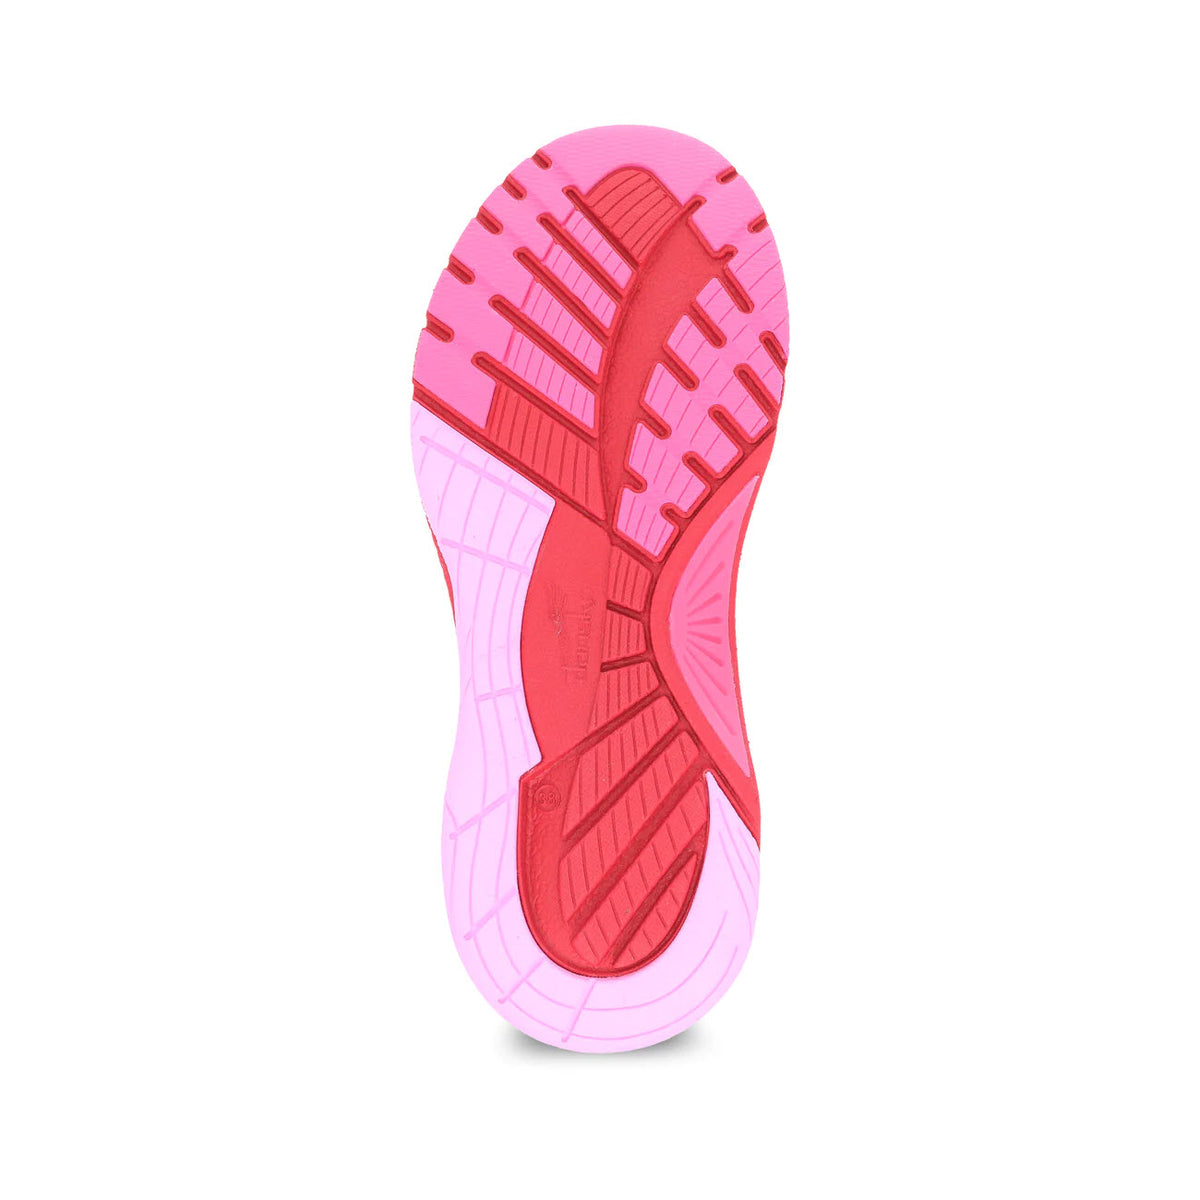 Red rubber sole of a high-performance DANSKO PEONY HOT PINK - WOMENS walking sneaker with a textured design and brand markings visible.